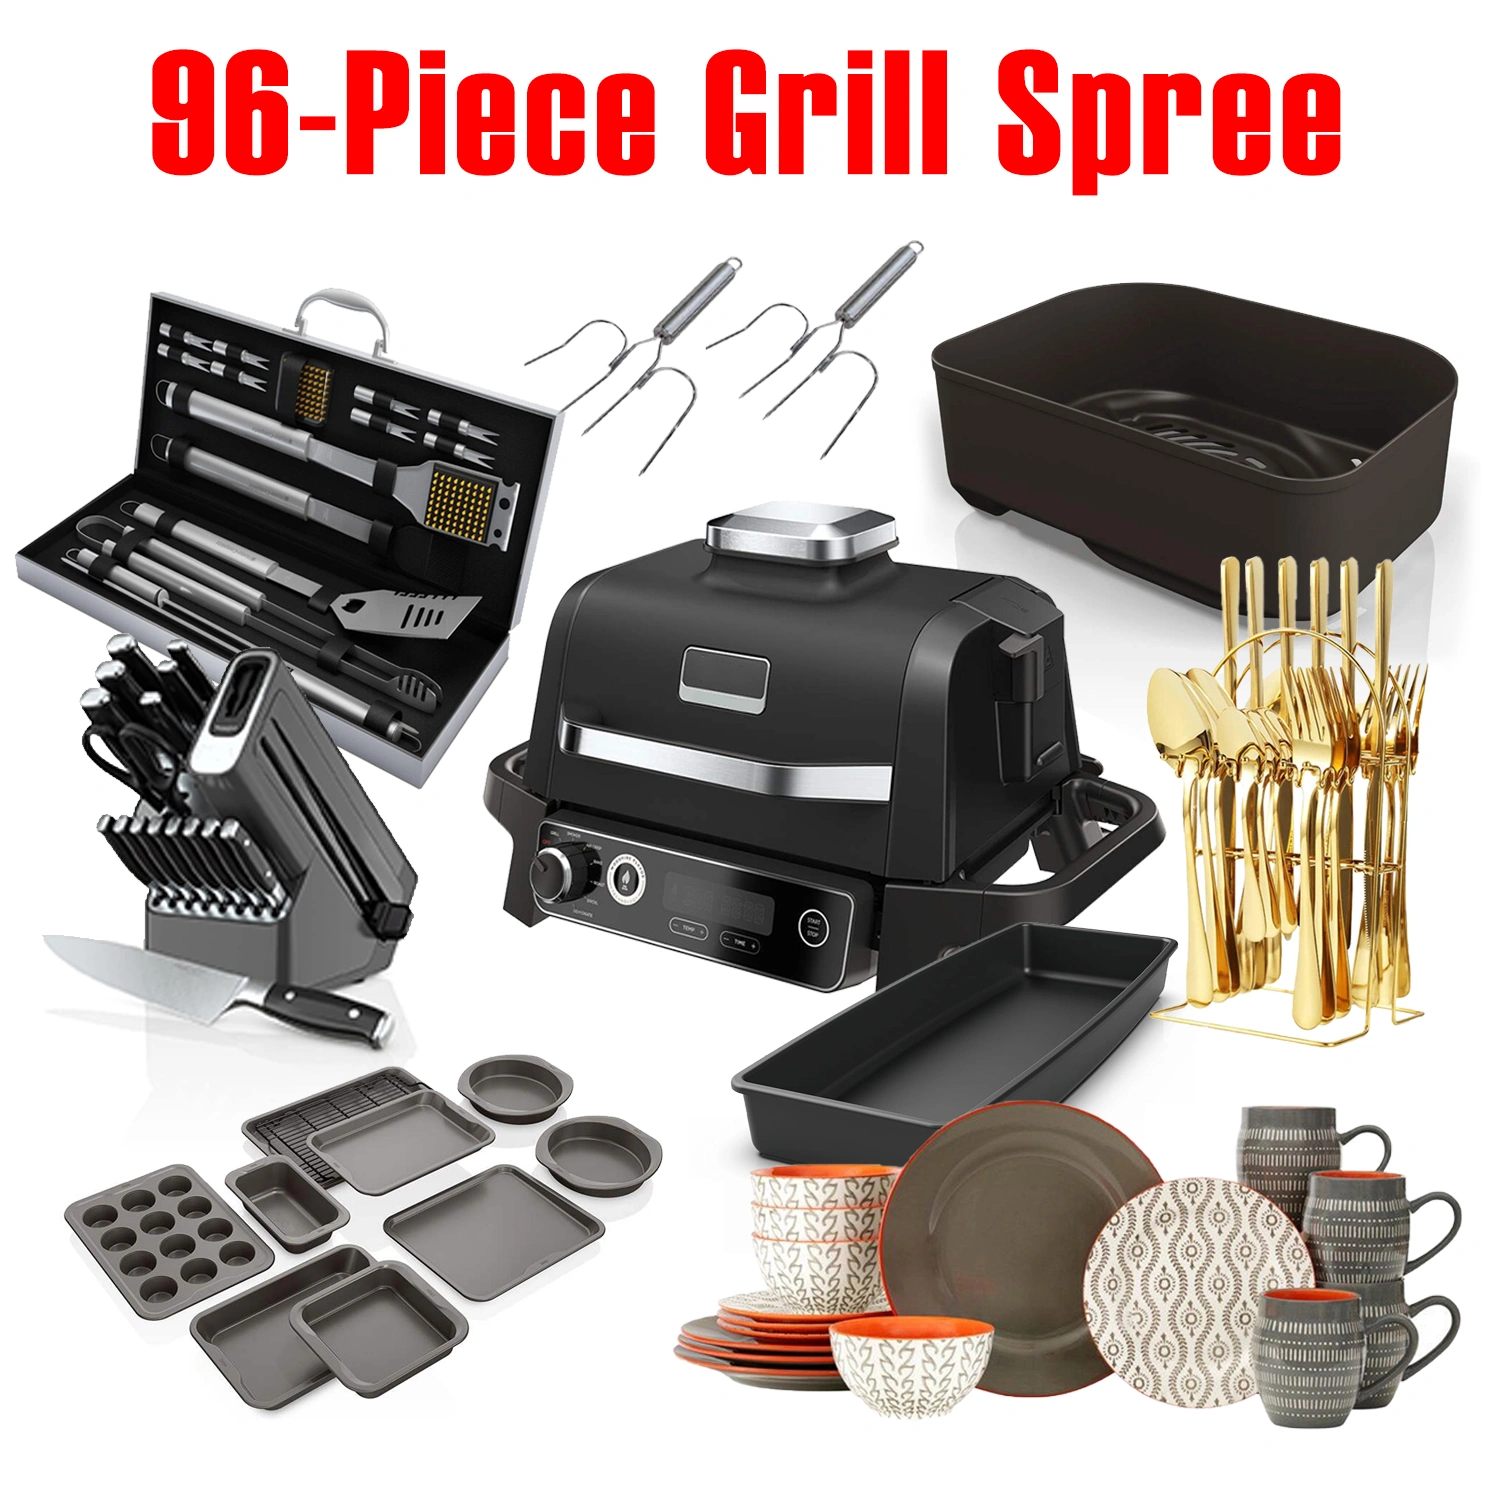 Limited-time Promotion, 96-Piece Grill Spree, Meeting All The Needs Of The Grill